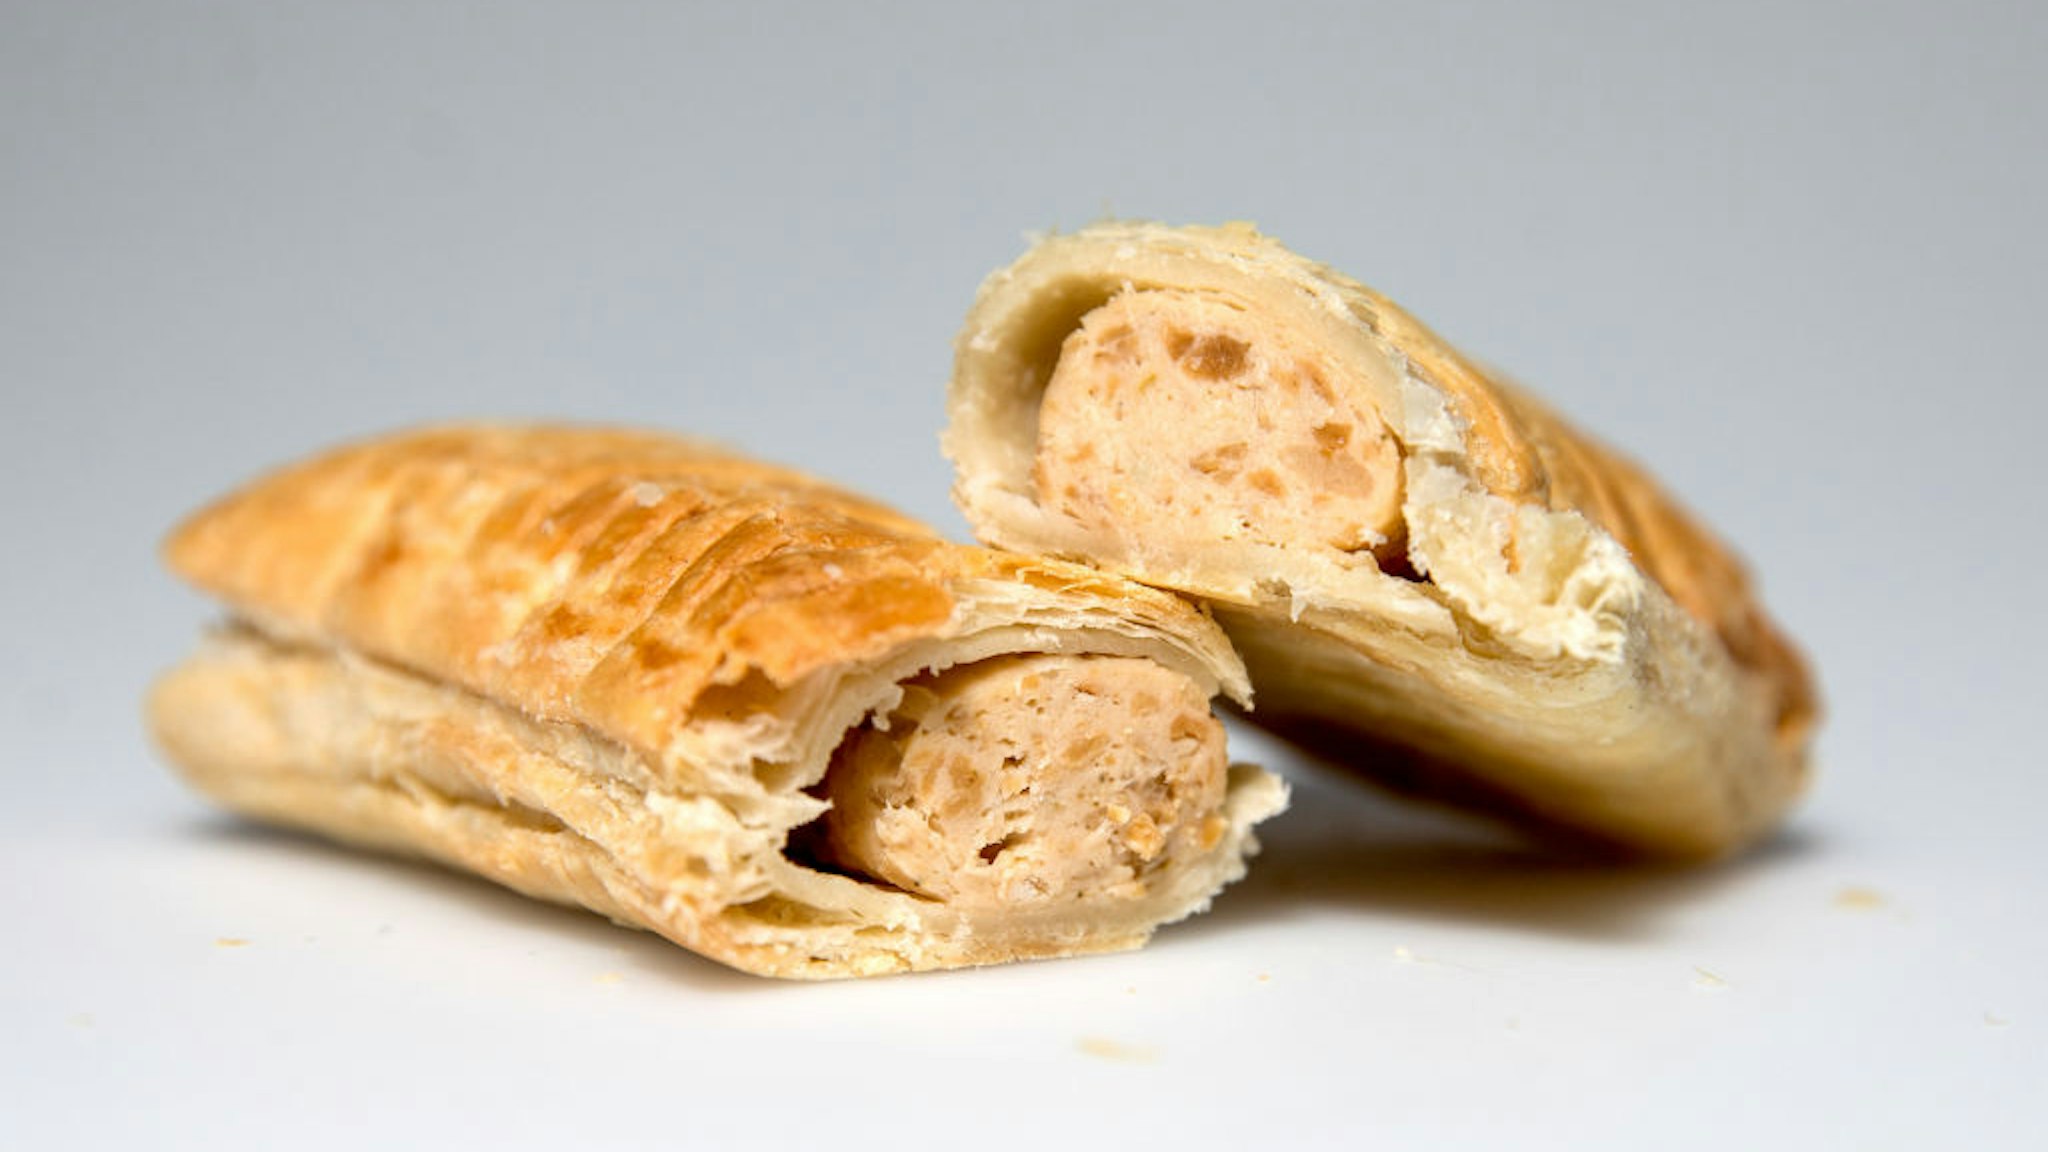 A vegan sausage rolls from a Greggs Plc sandwich chain outlet sits on display in this arranged photograph in London, U.K.